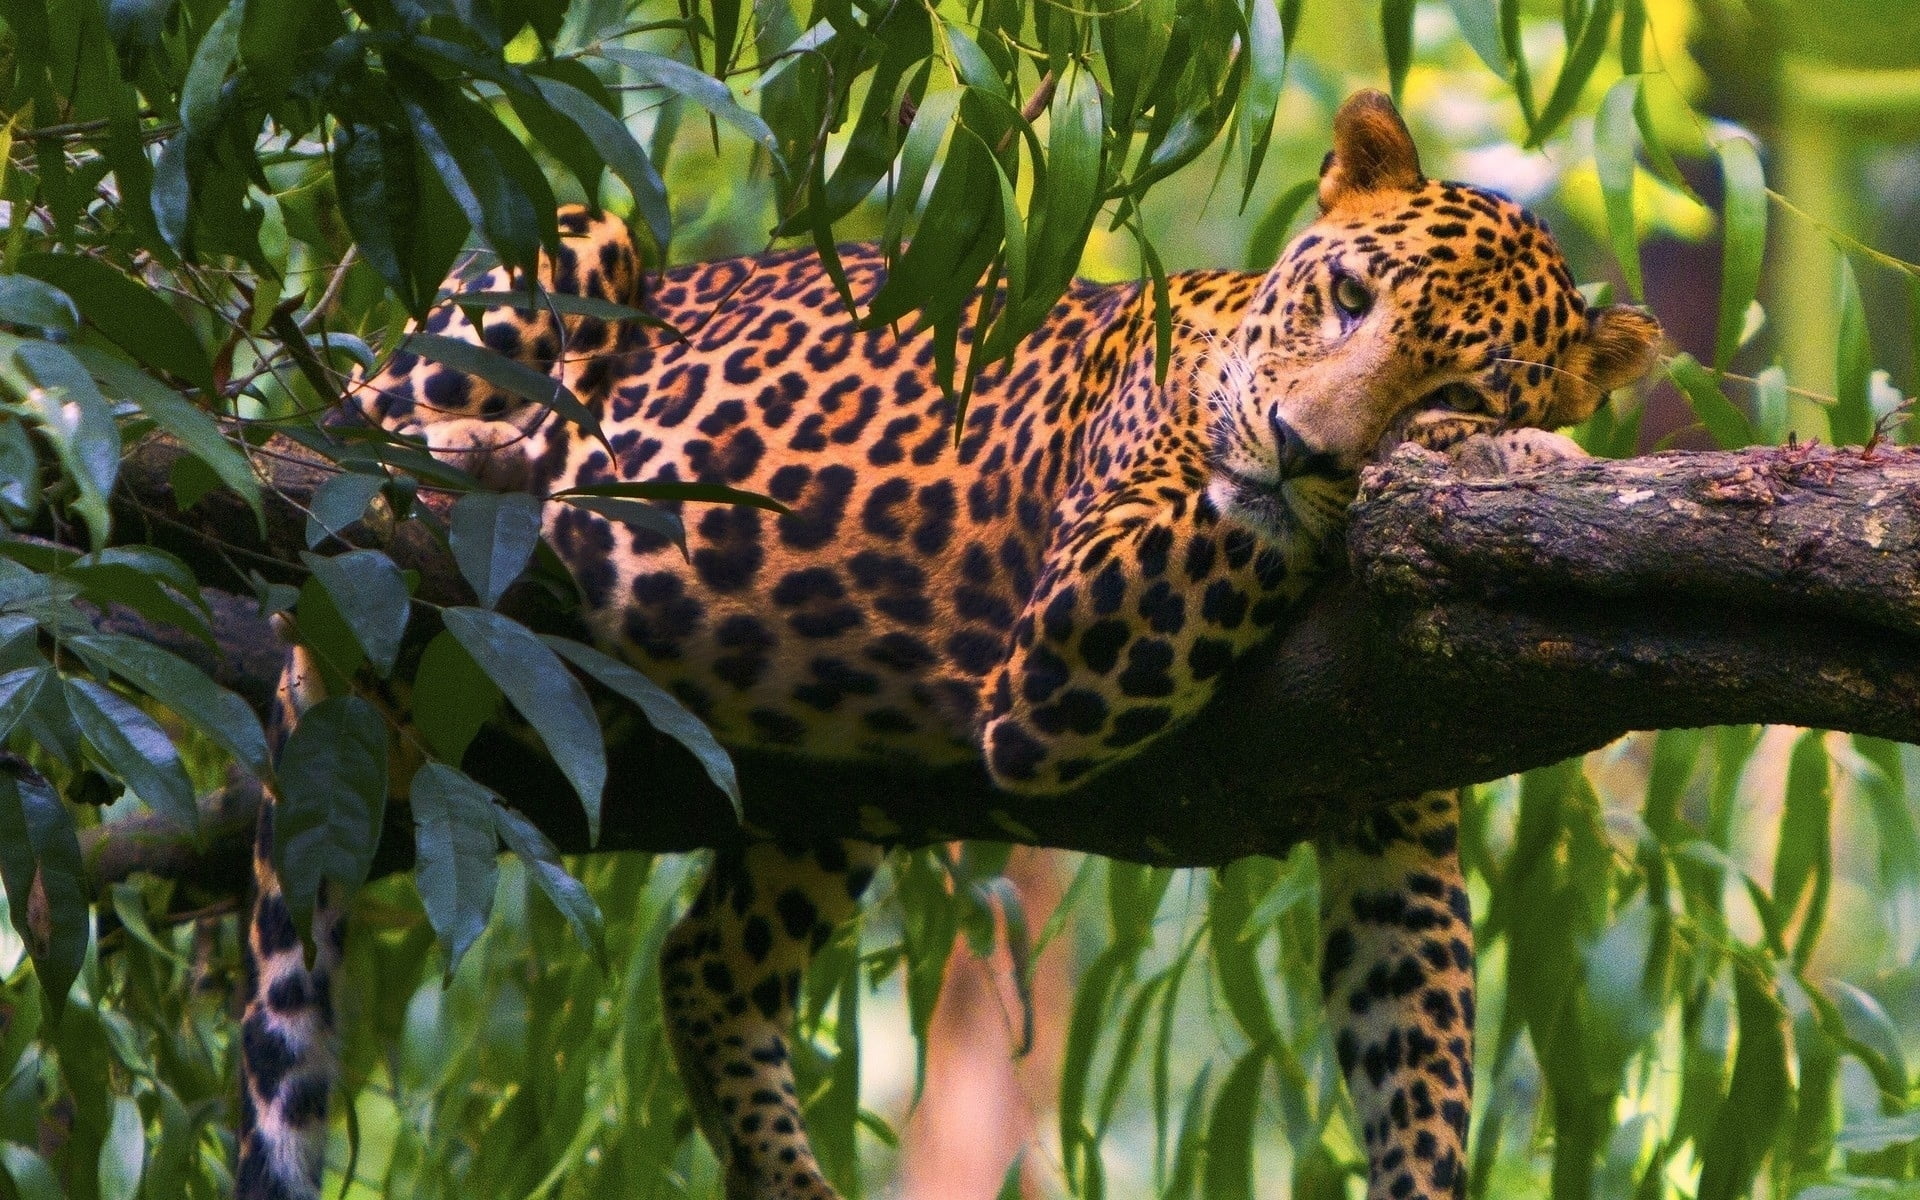 Download free HD wallpaper from above link! #leopard #tree #laying